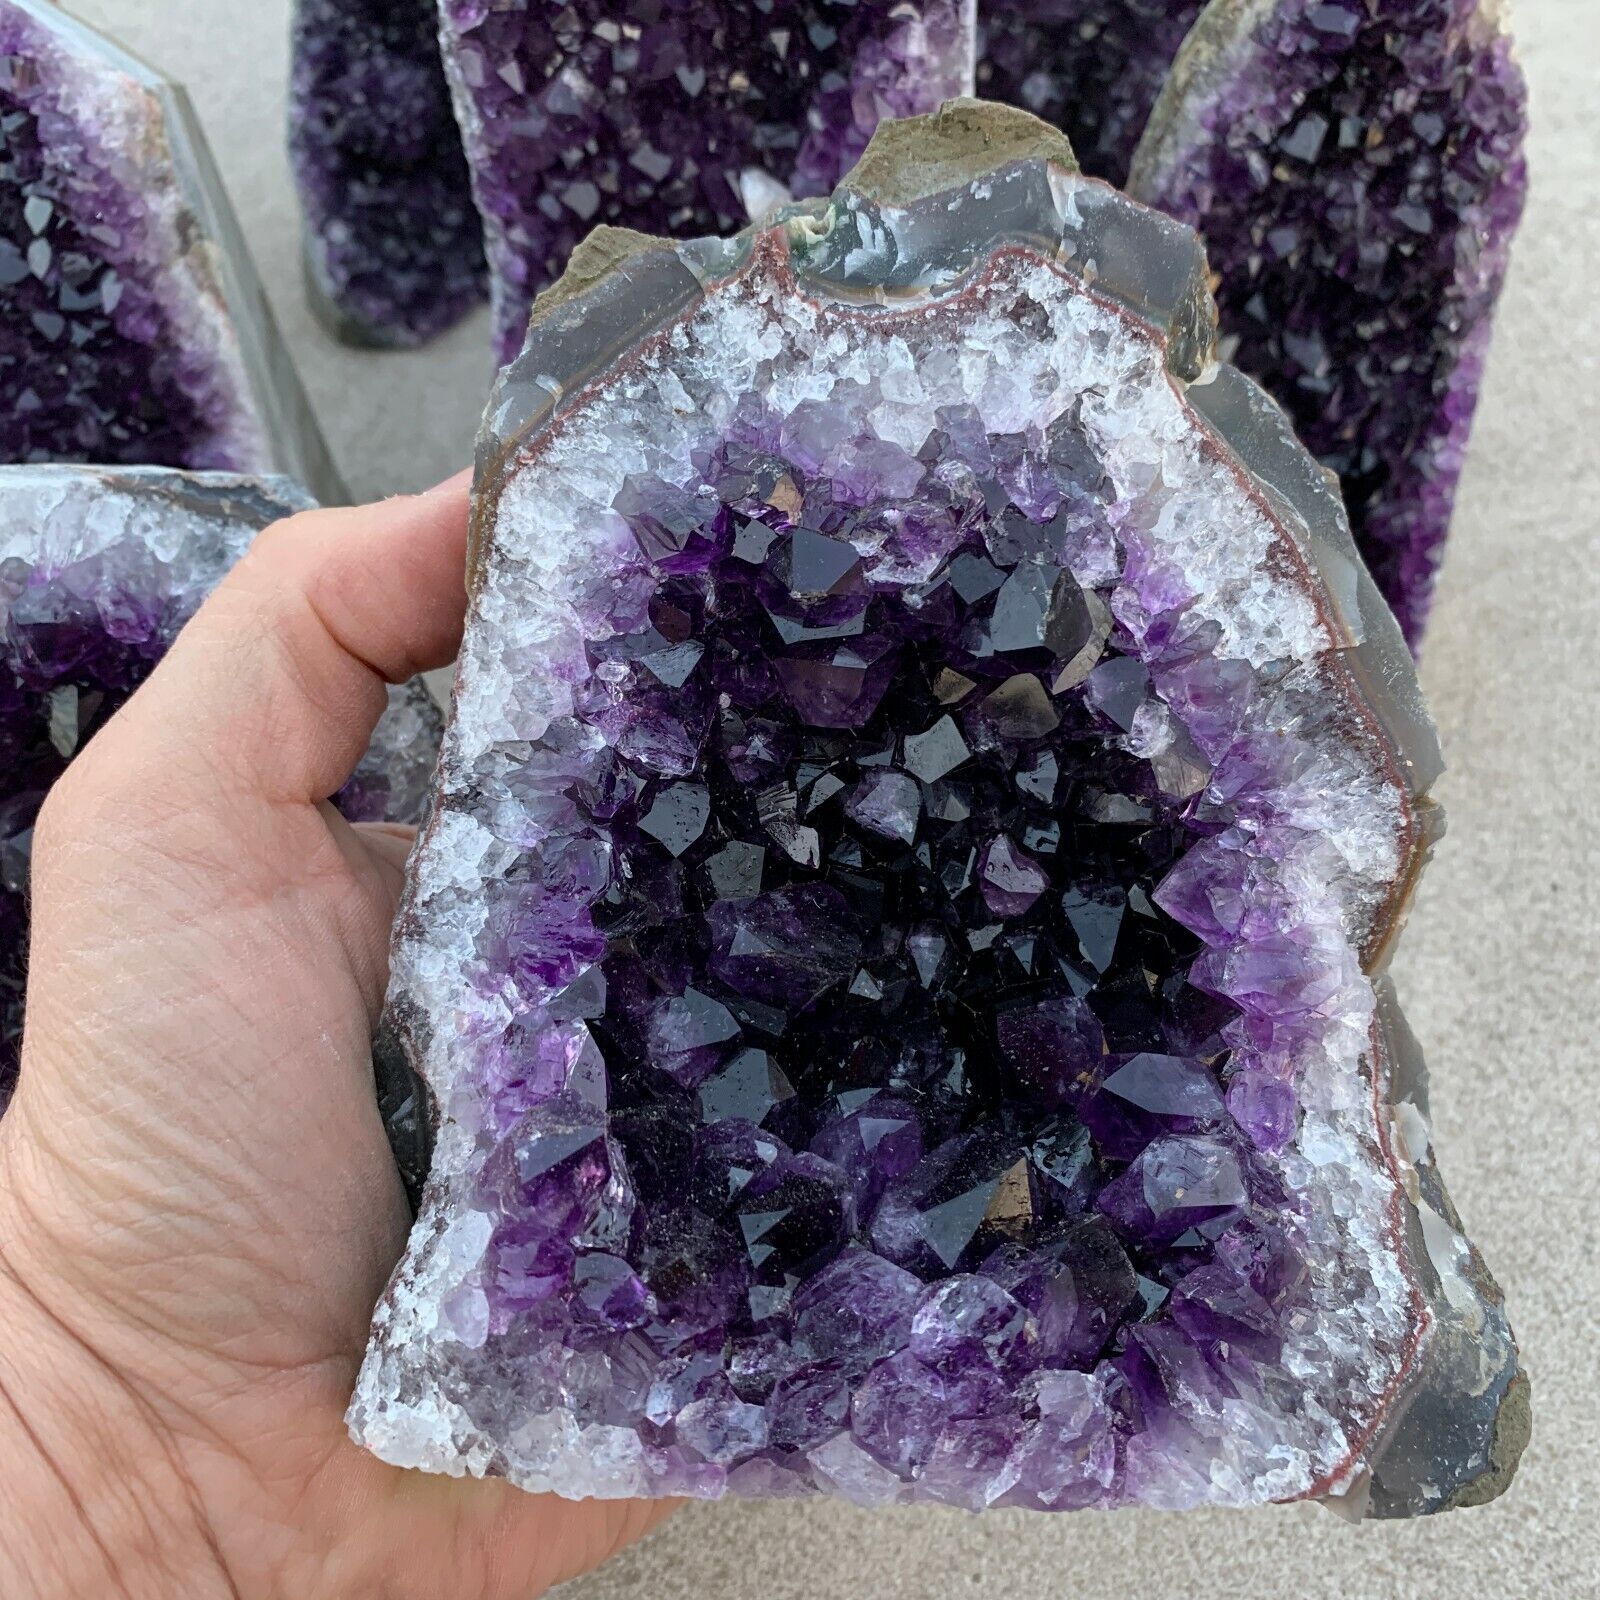 EXTRA EXTRA LARGE AMETHYST Druze Crystal Cluster With Cut Base Specimen ~ 3 Lbs.